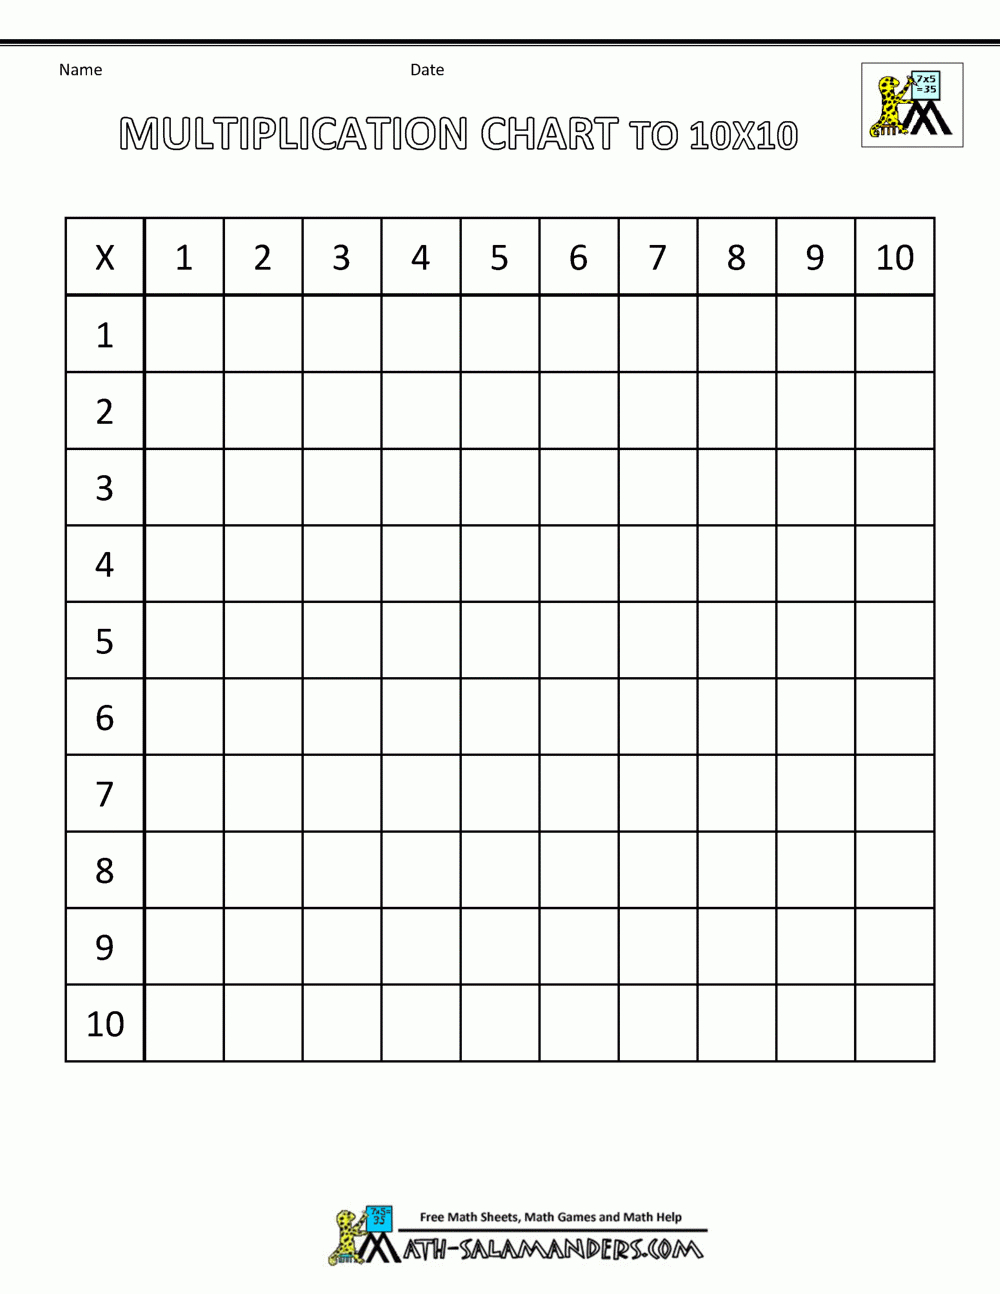 Multiplication Times Table Chart intended for Printable Blank Multiplication Chart 1-10